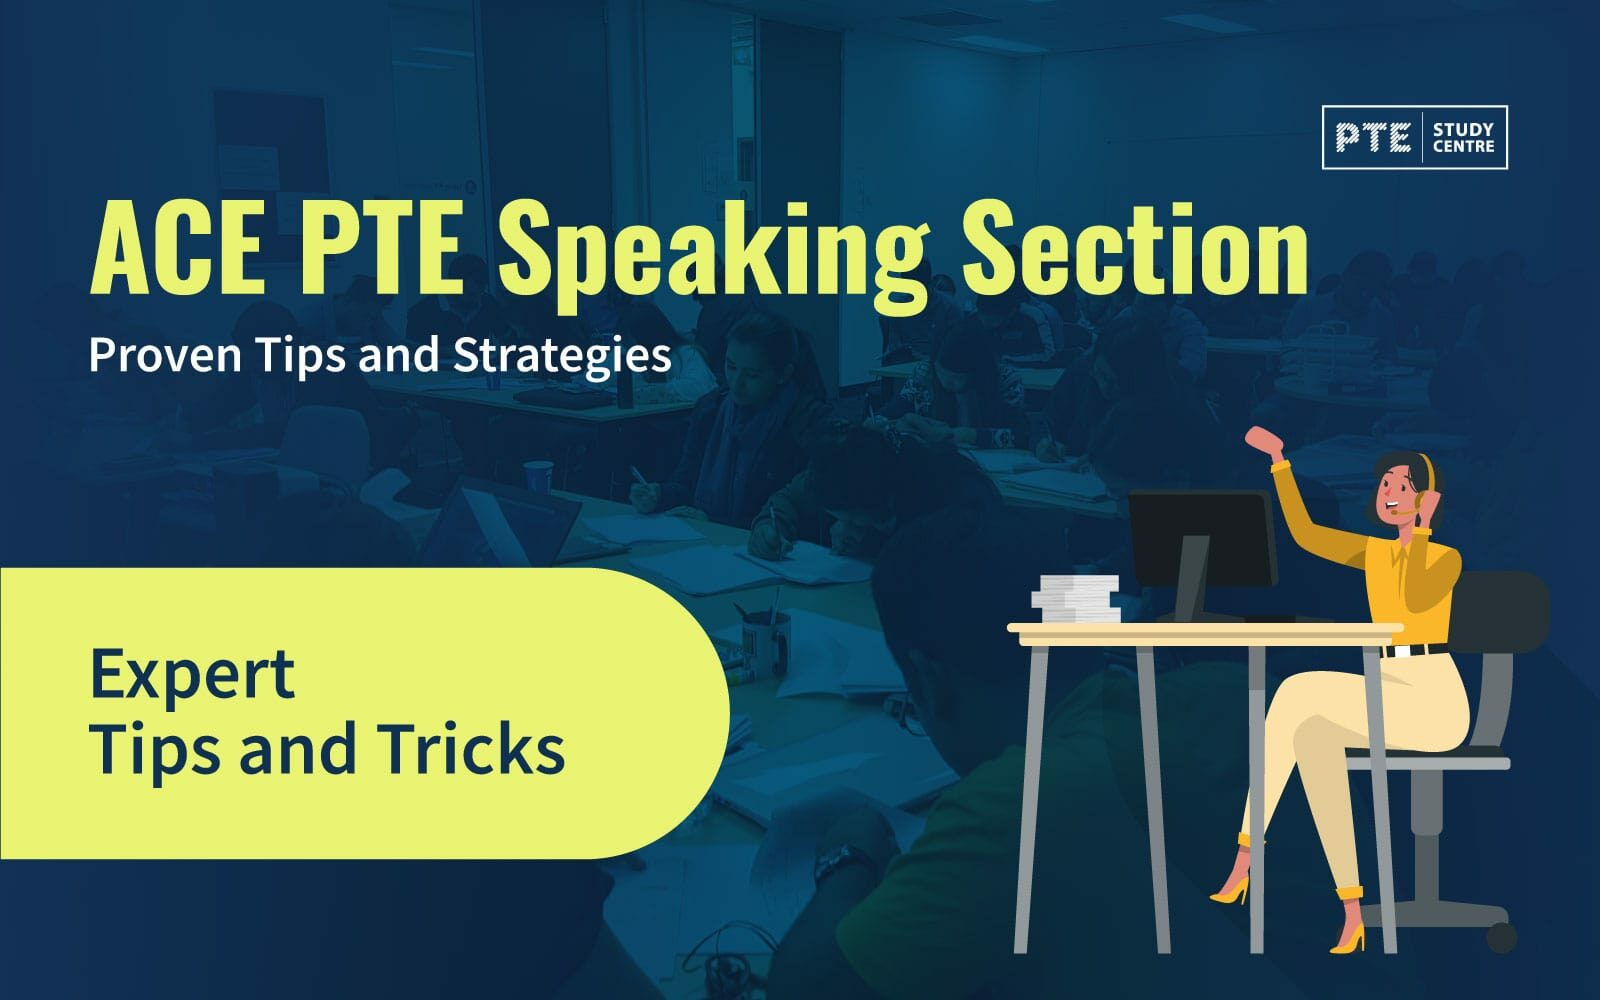 Ace PTE Speaking Section: Proven Tips and Strategies